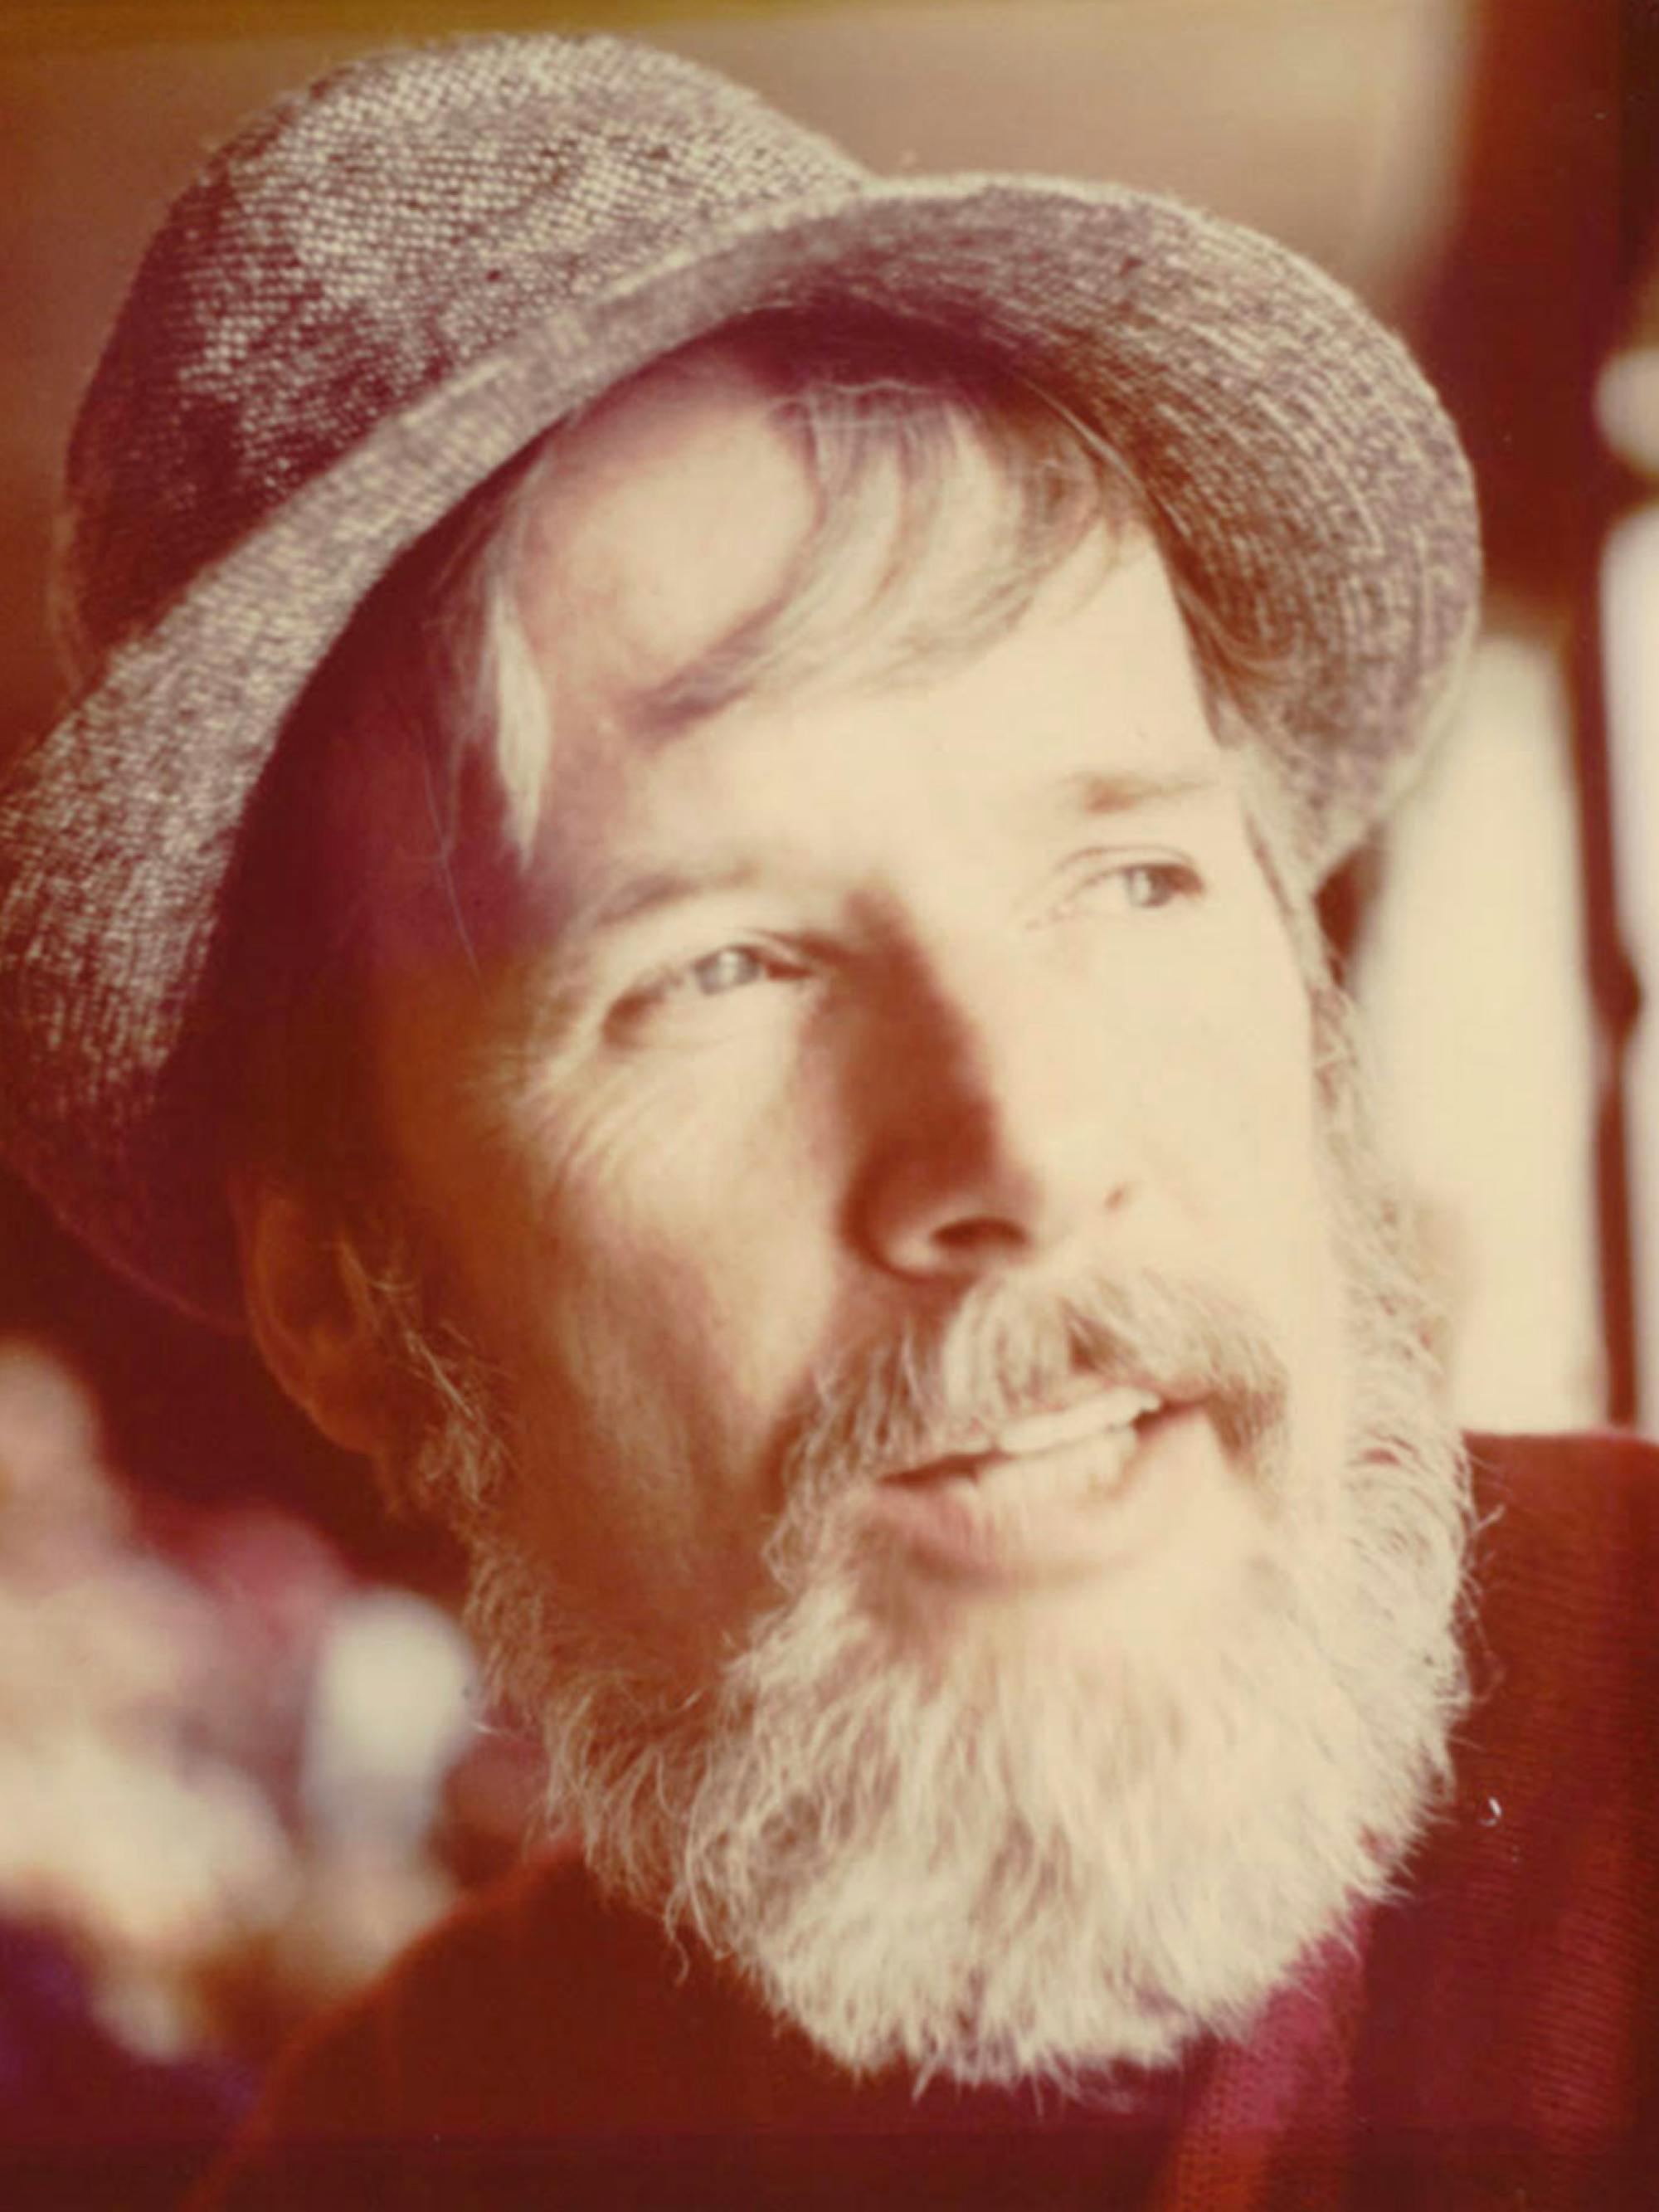 Jack Fincher sports a white beard and moustache, plus a fedora, in this sepia-toned photograph.